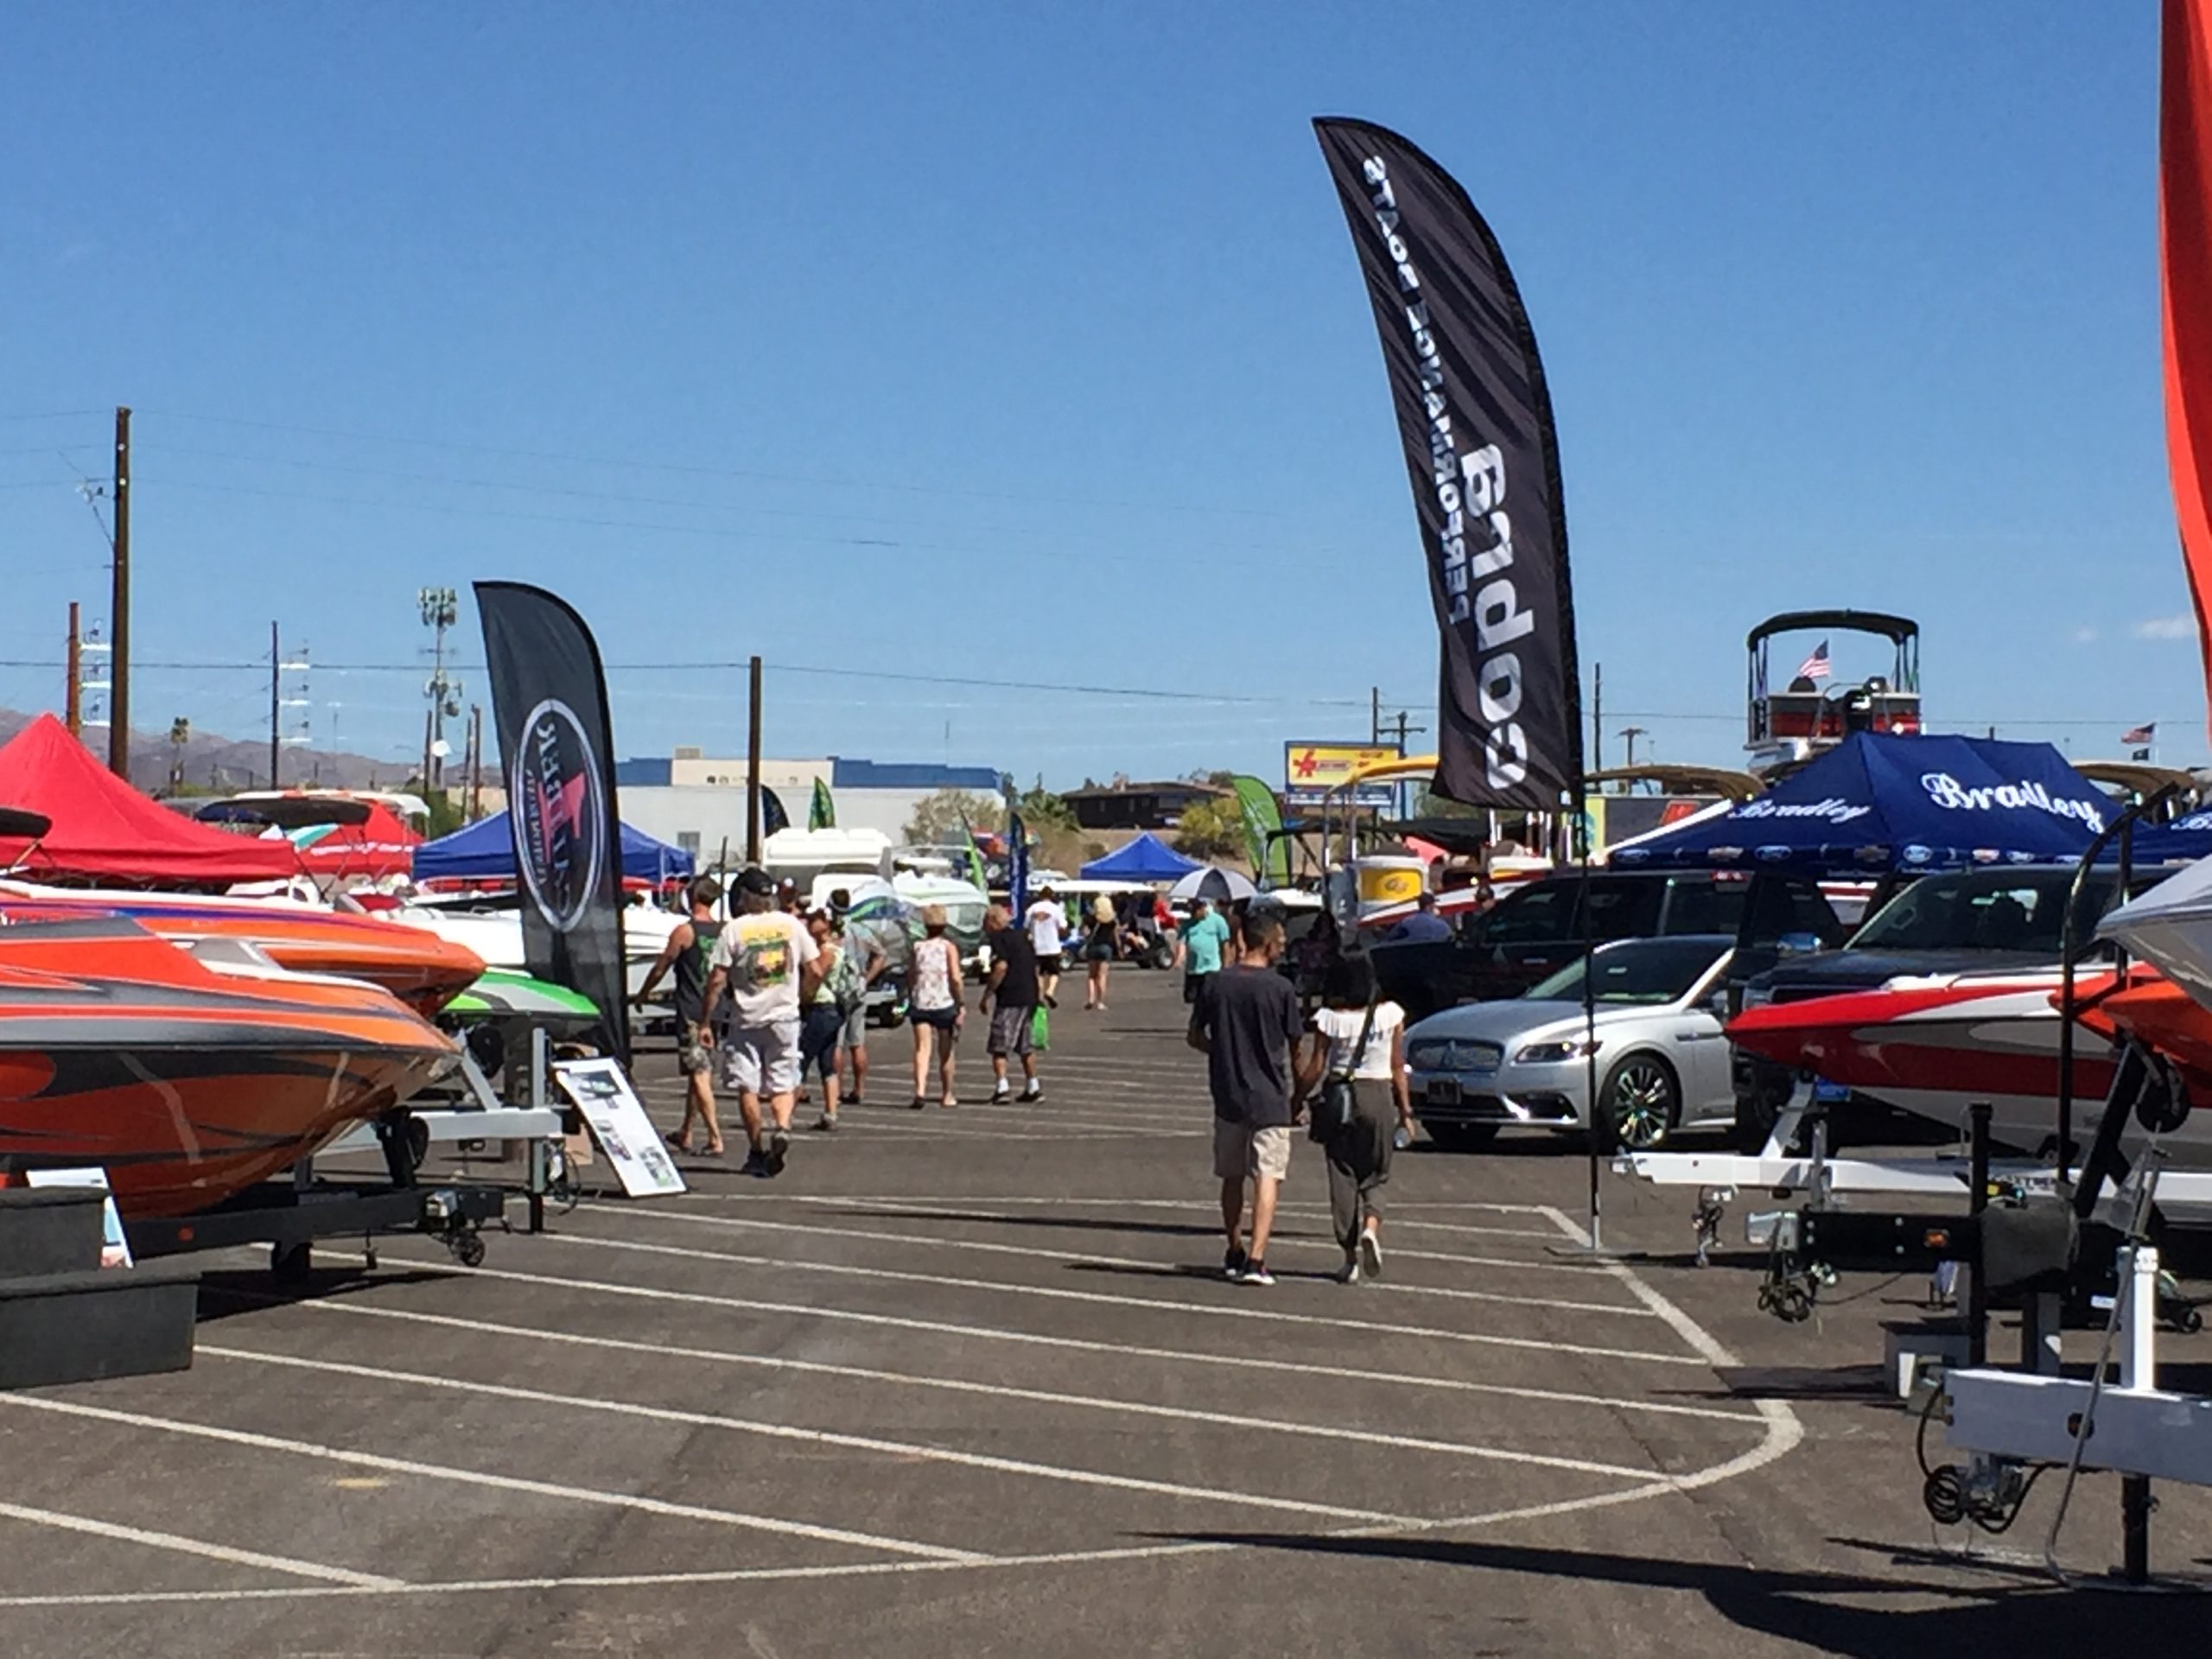 Anderson Powersports Boat Show Set For This Weekend